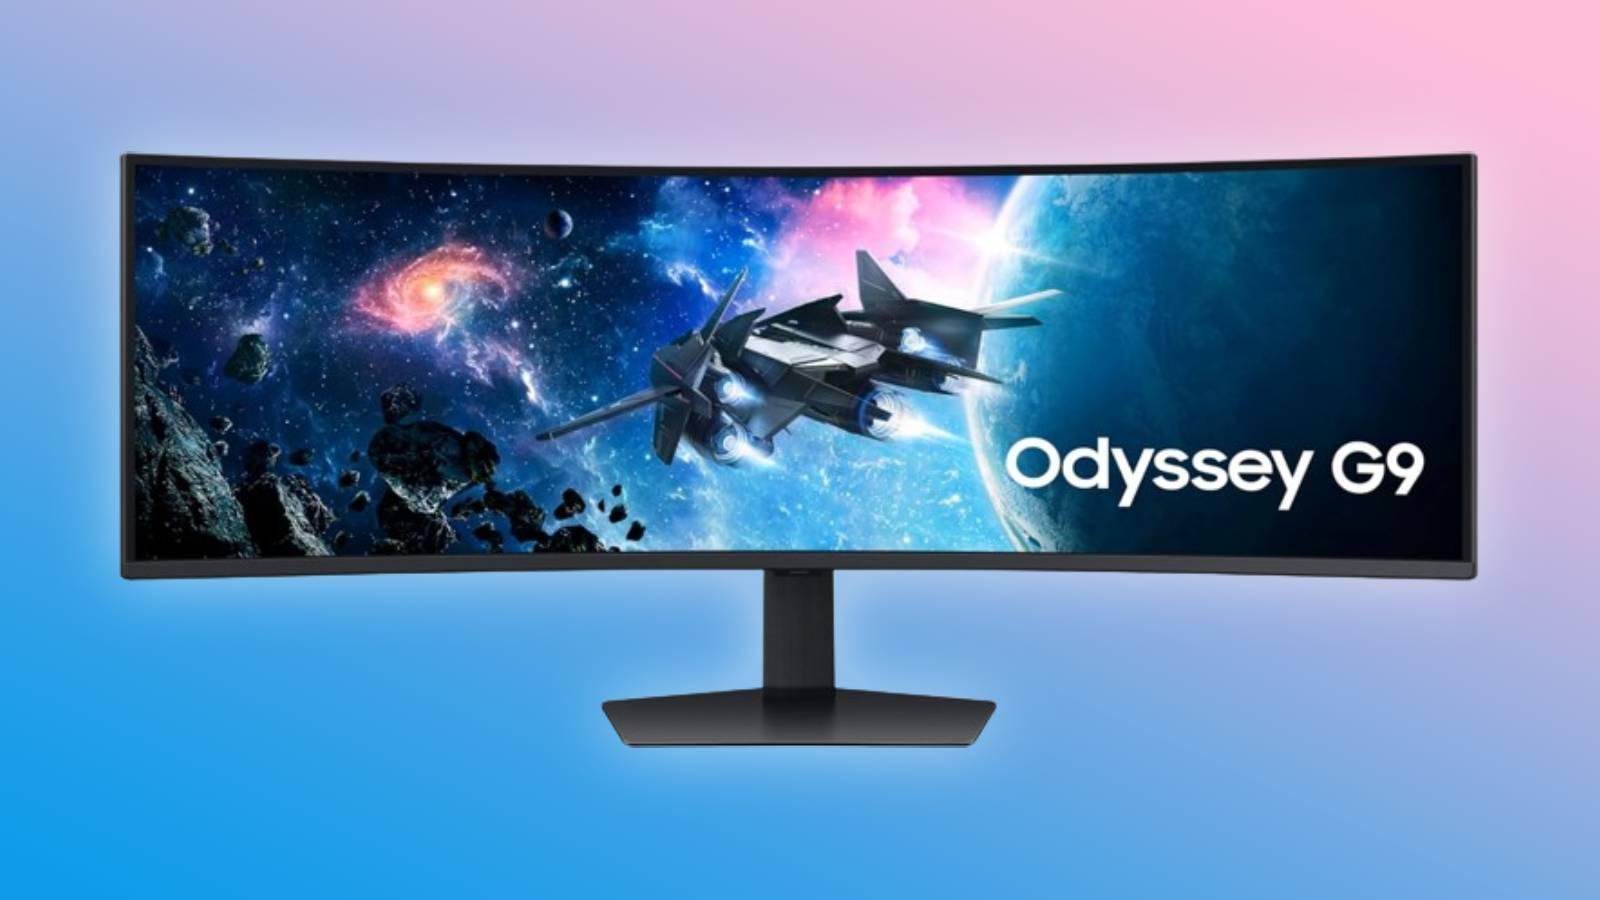 Image of the Samsung Odyssesy G9 curved gaming monitor on a pink and blue background.